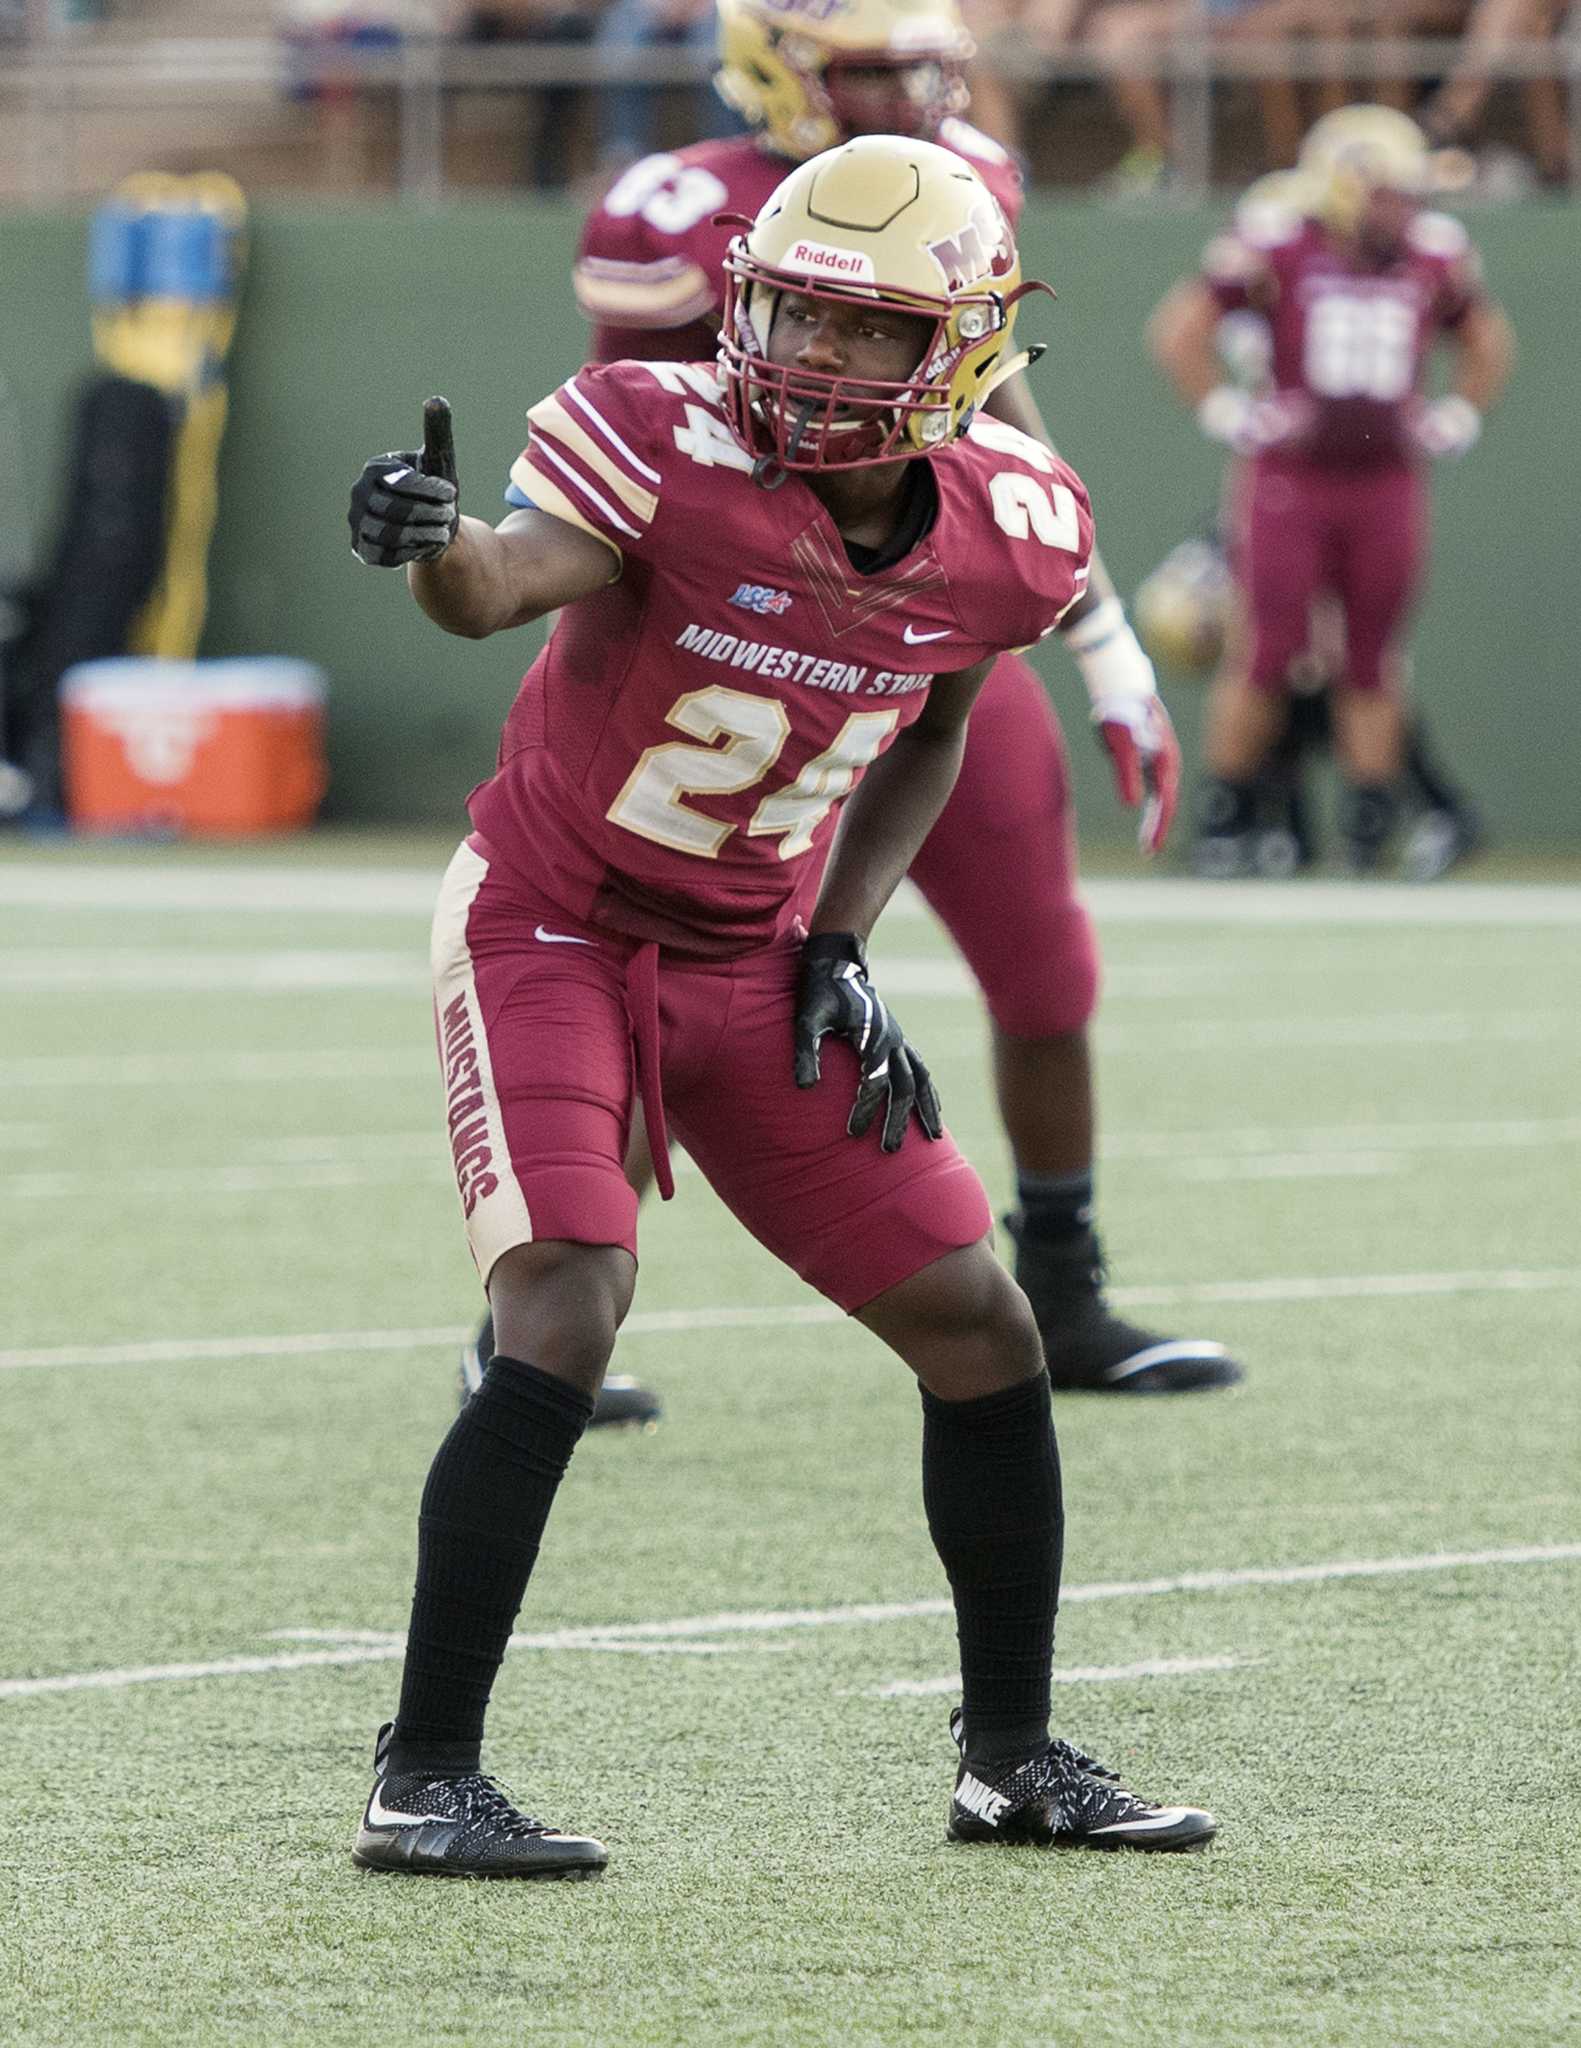 COLLEGE FOOTBALL: Midwestern State player, 19, dies after injury during